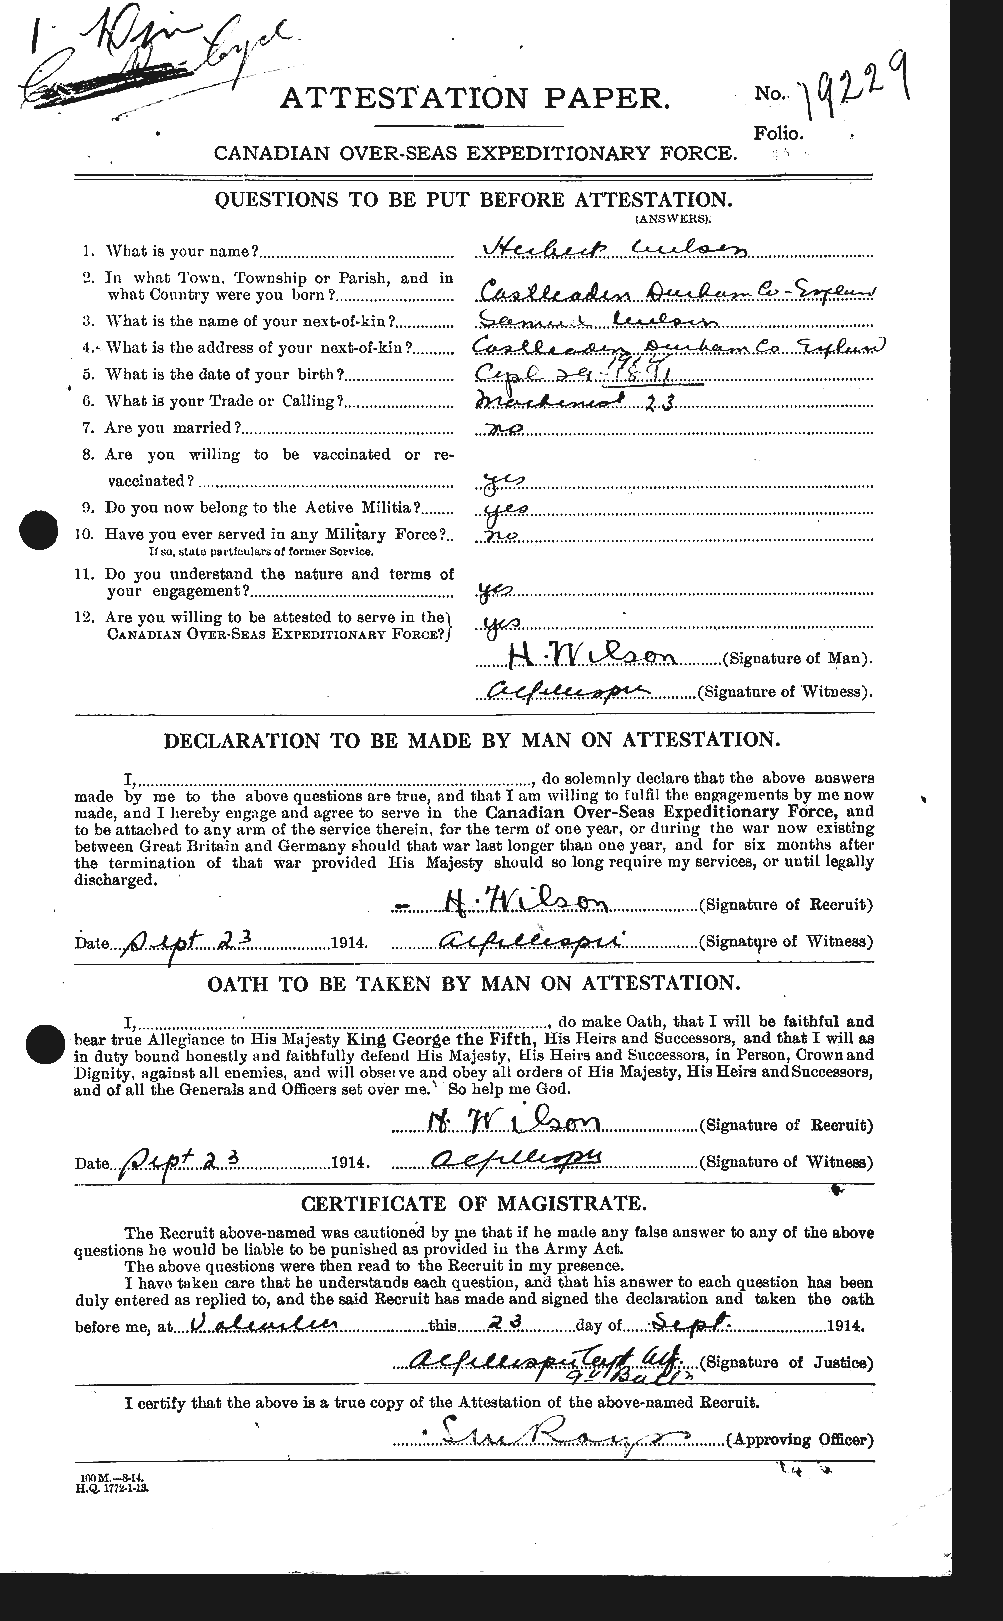 Personnel Records of the First World War - CEF 679556a